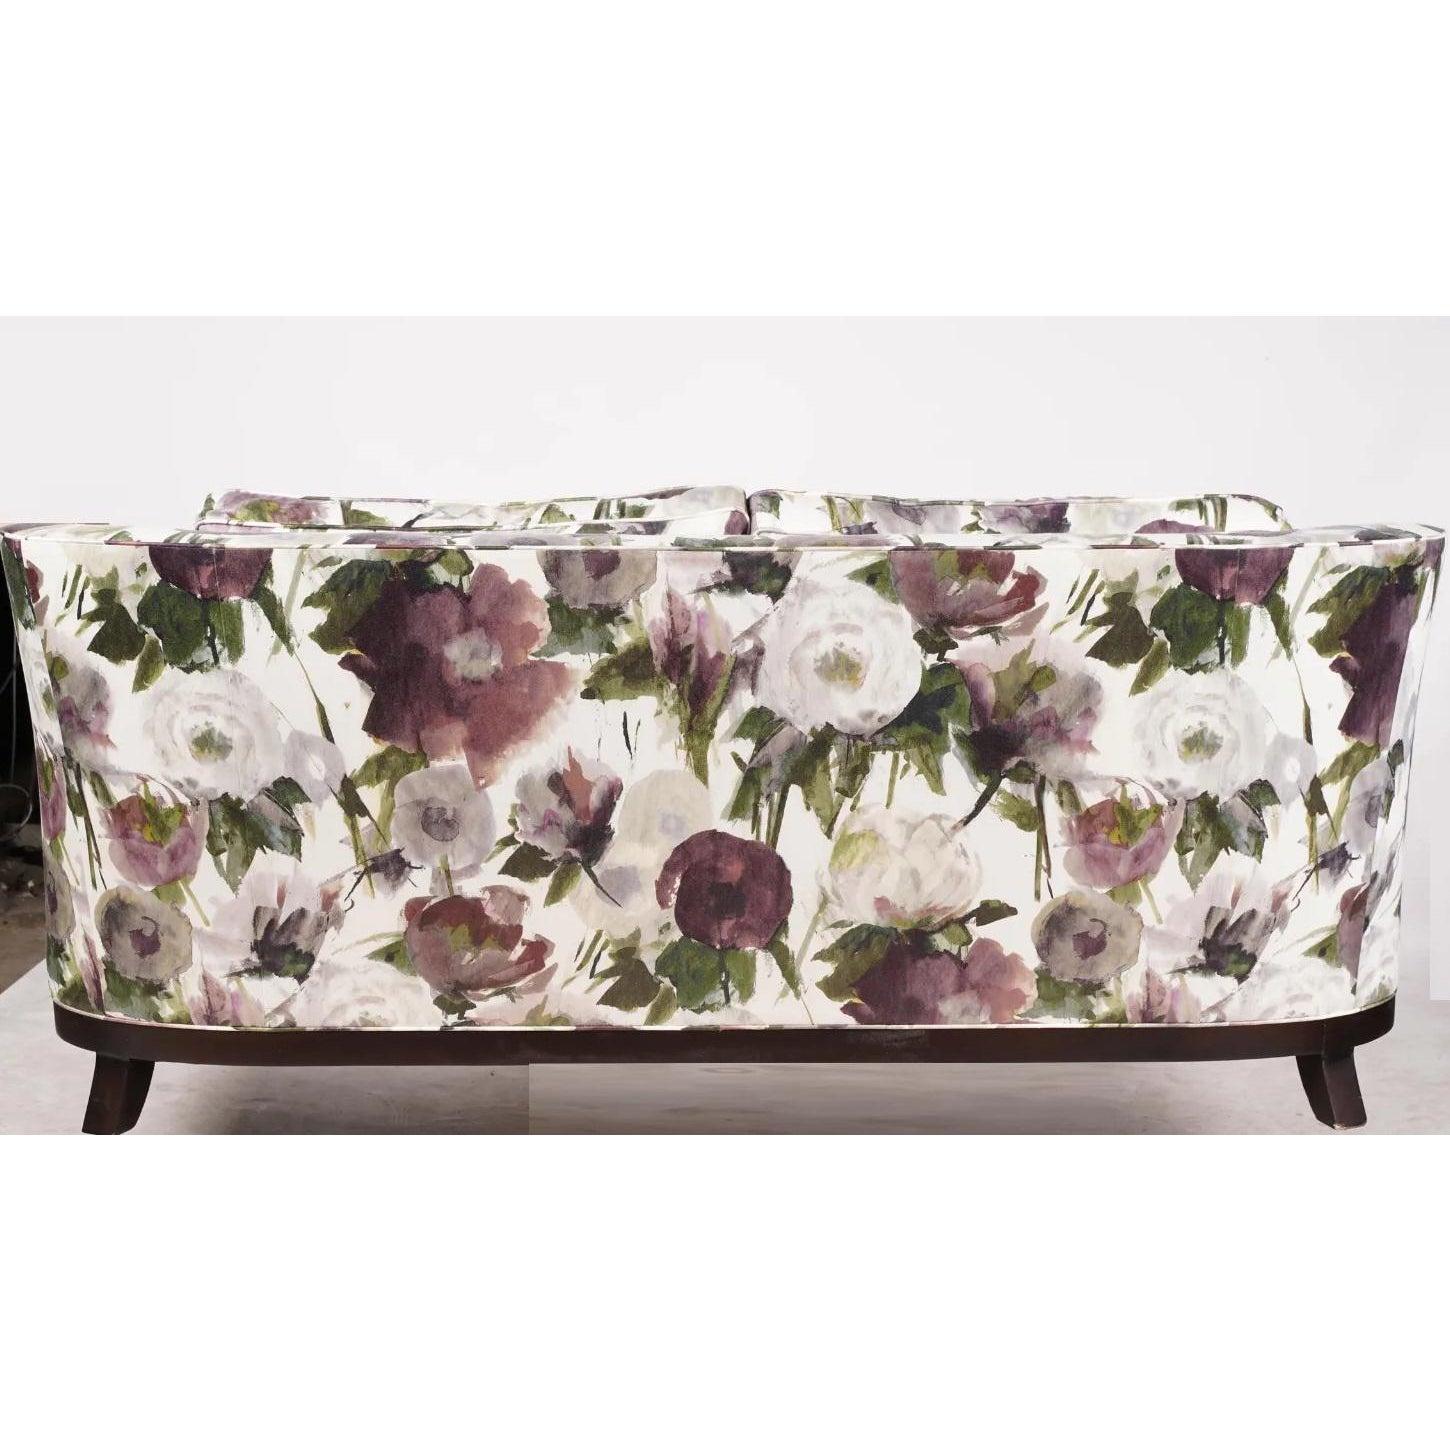 Baker Furniture Company upholstered sofa w purple floral Modern Art Deco style print.

Marked Baker Furniture Company under the center cushion.